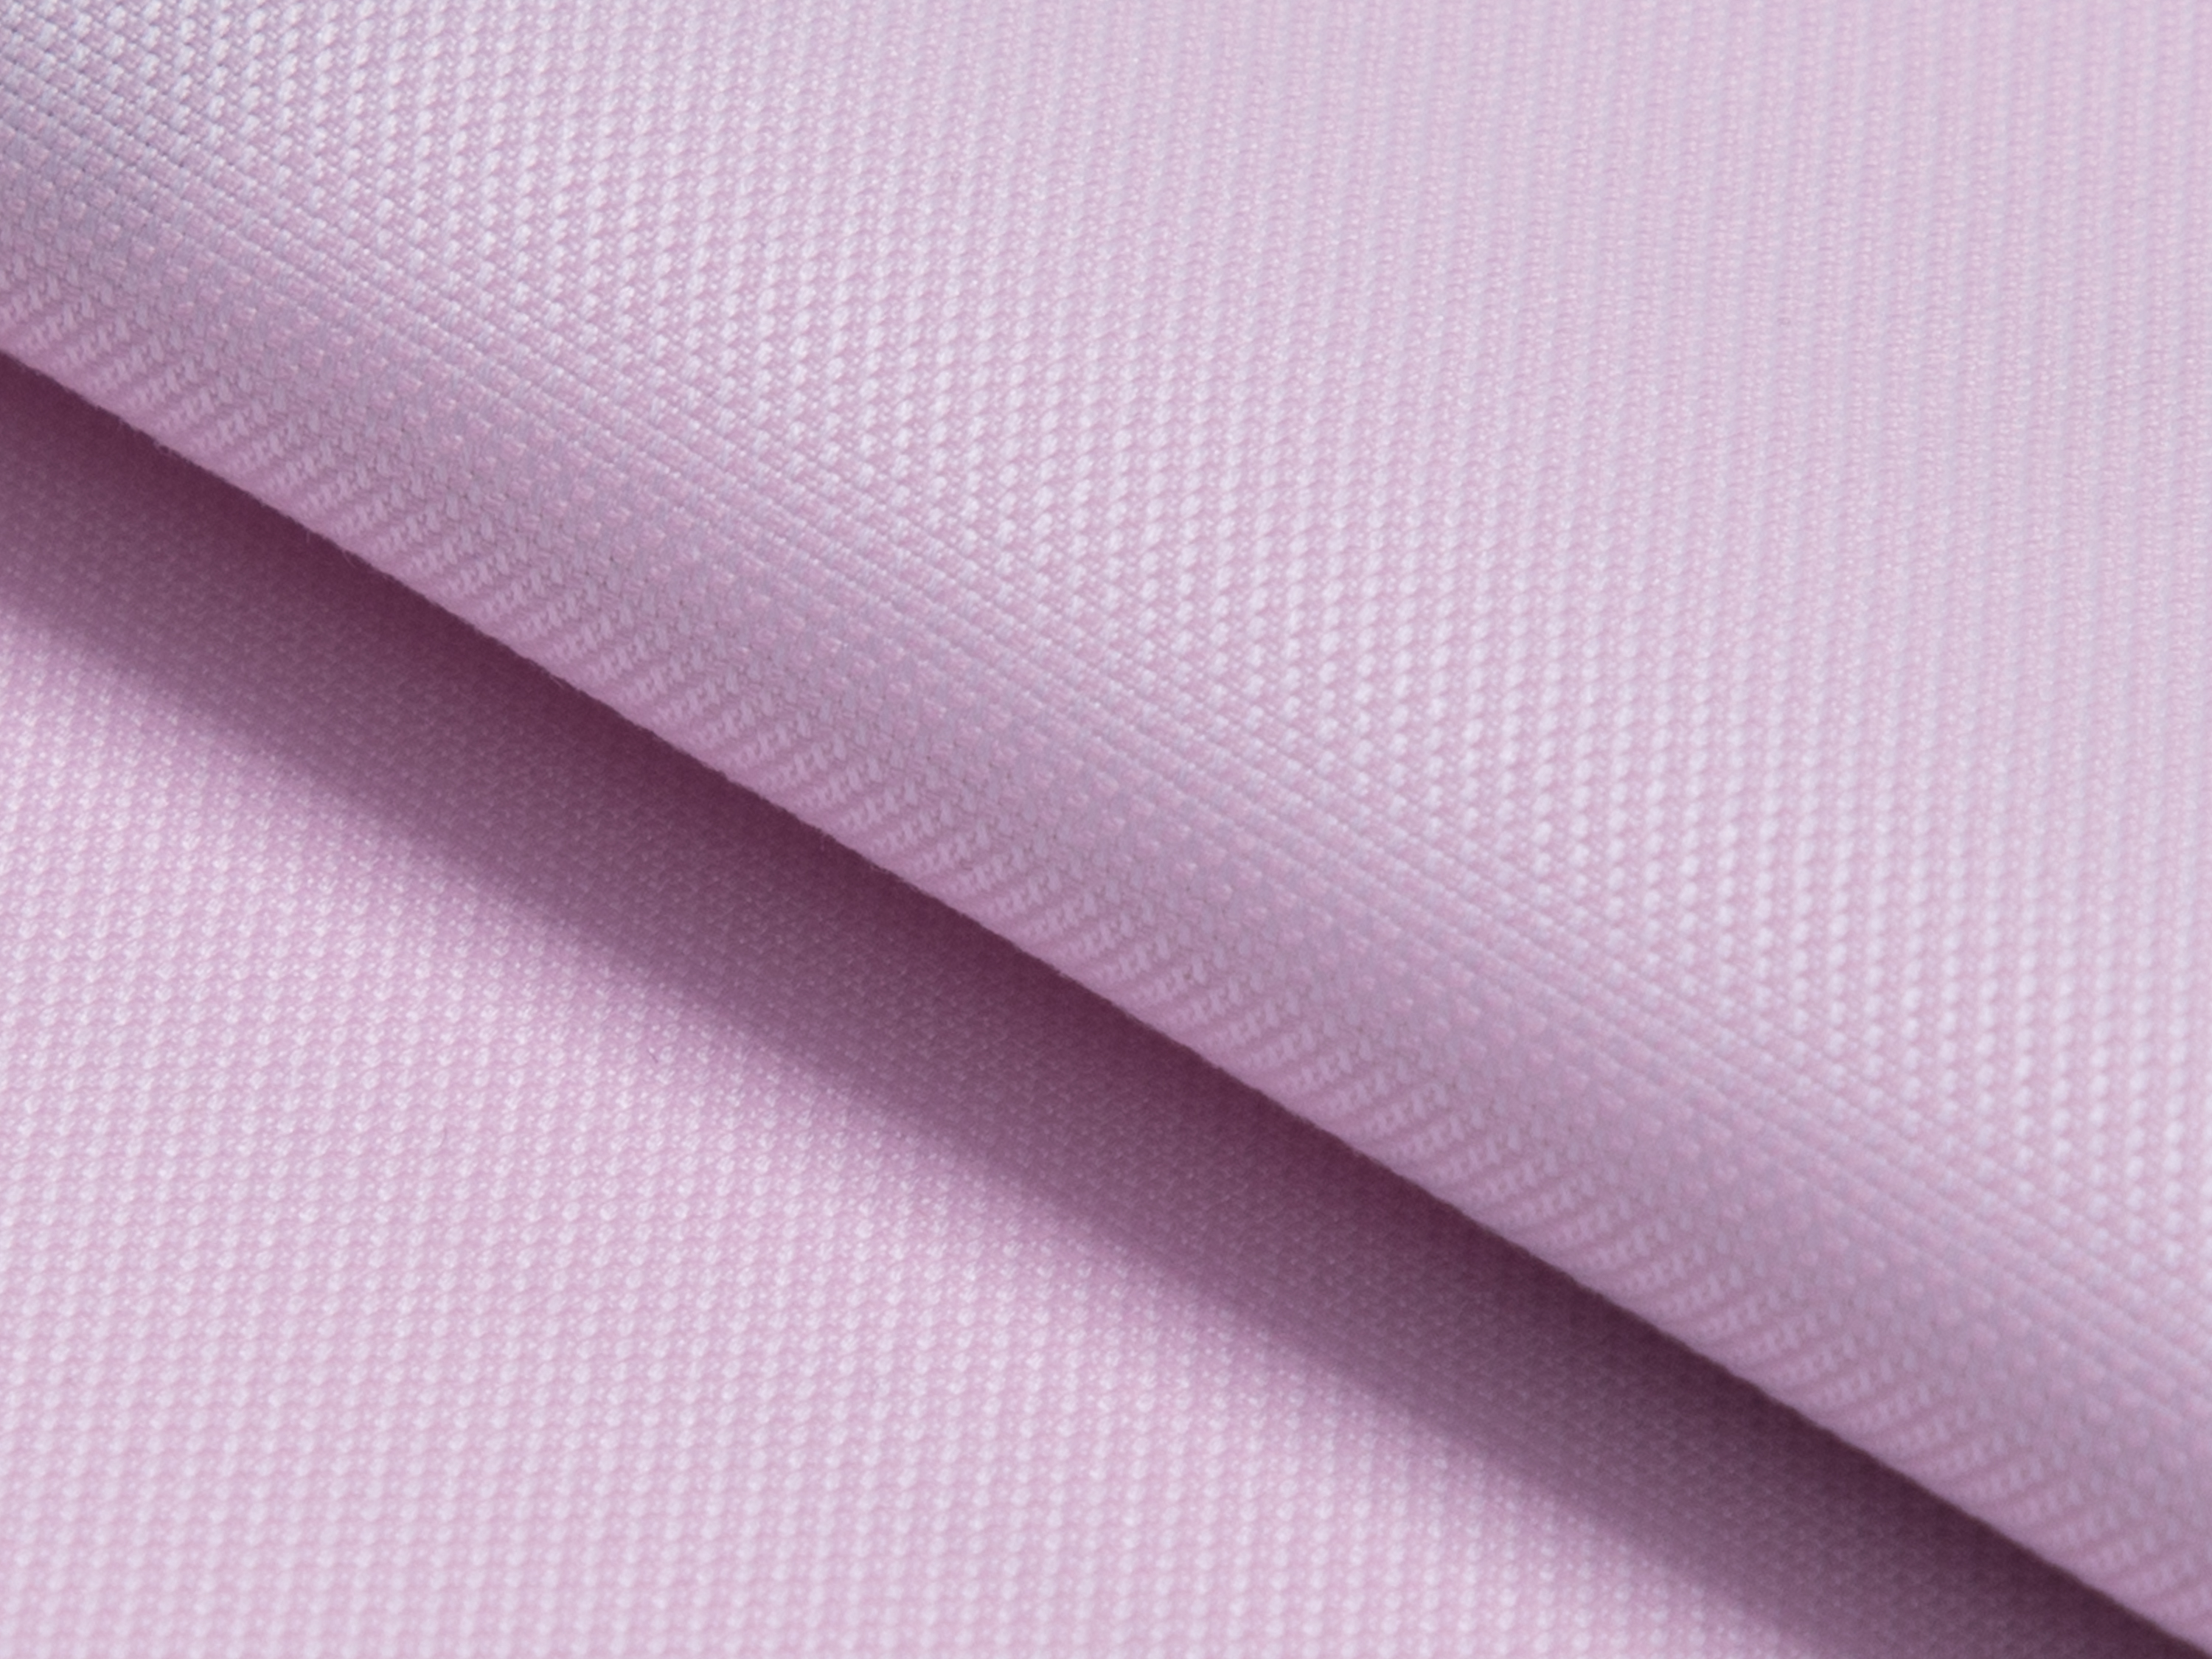 Buy tailor made shirts online - MAYFAIR - Pinpoint Pink